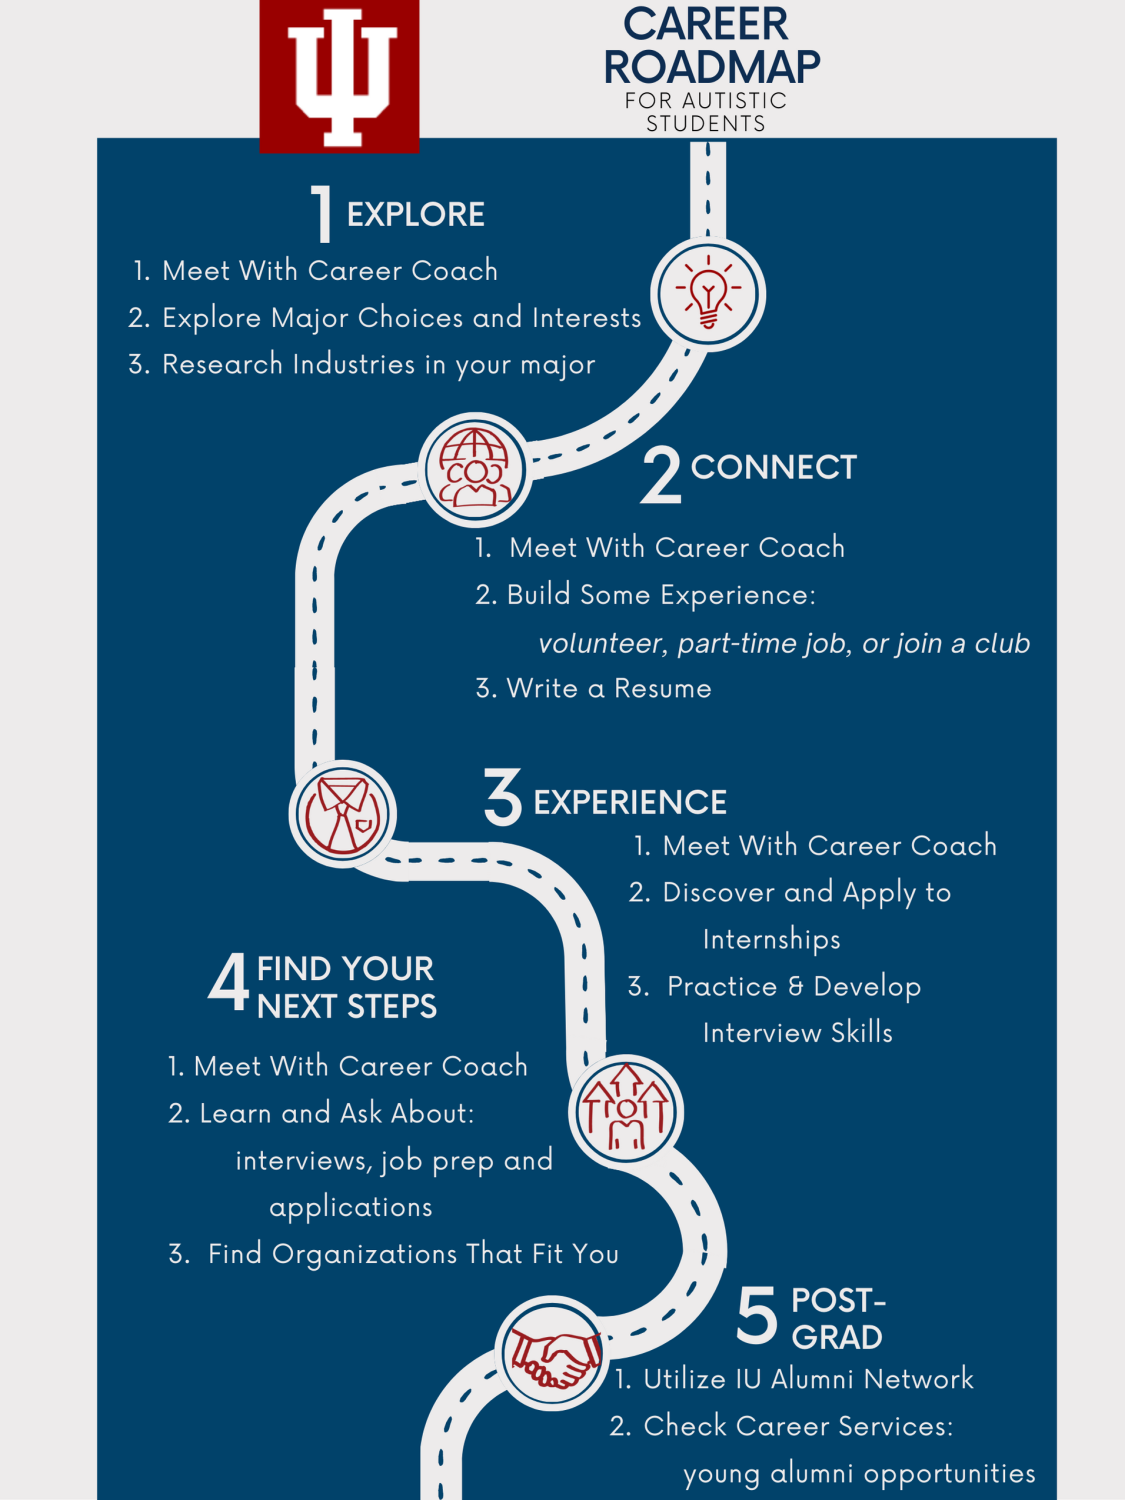 This image documents each step that is recommended for career preparation from your first year in college through graduation. EXPLORE Year 1: meet with career coach; explore major choices/interests; research industries. CONNECT Year 2: meet with career coach; build some experience like volunteer, part-time job, or join a club. EXPERIENCE Year 3: meet with career coach; discover and apply to internships; practice and develop interview skills. FIND YOUR NEXT STEPS Year 4: meet with career coach; learn and ask about interviews, job prep, and applications; find organizations that fit you. POST-GRAD Year 5: utilize IU Alumni Network; check career services for young alumni opportunities